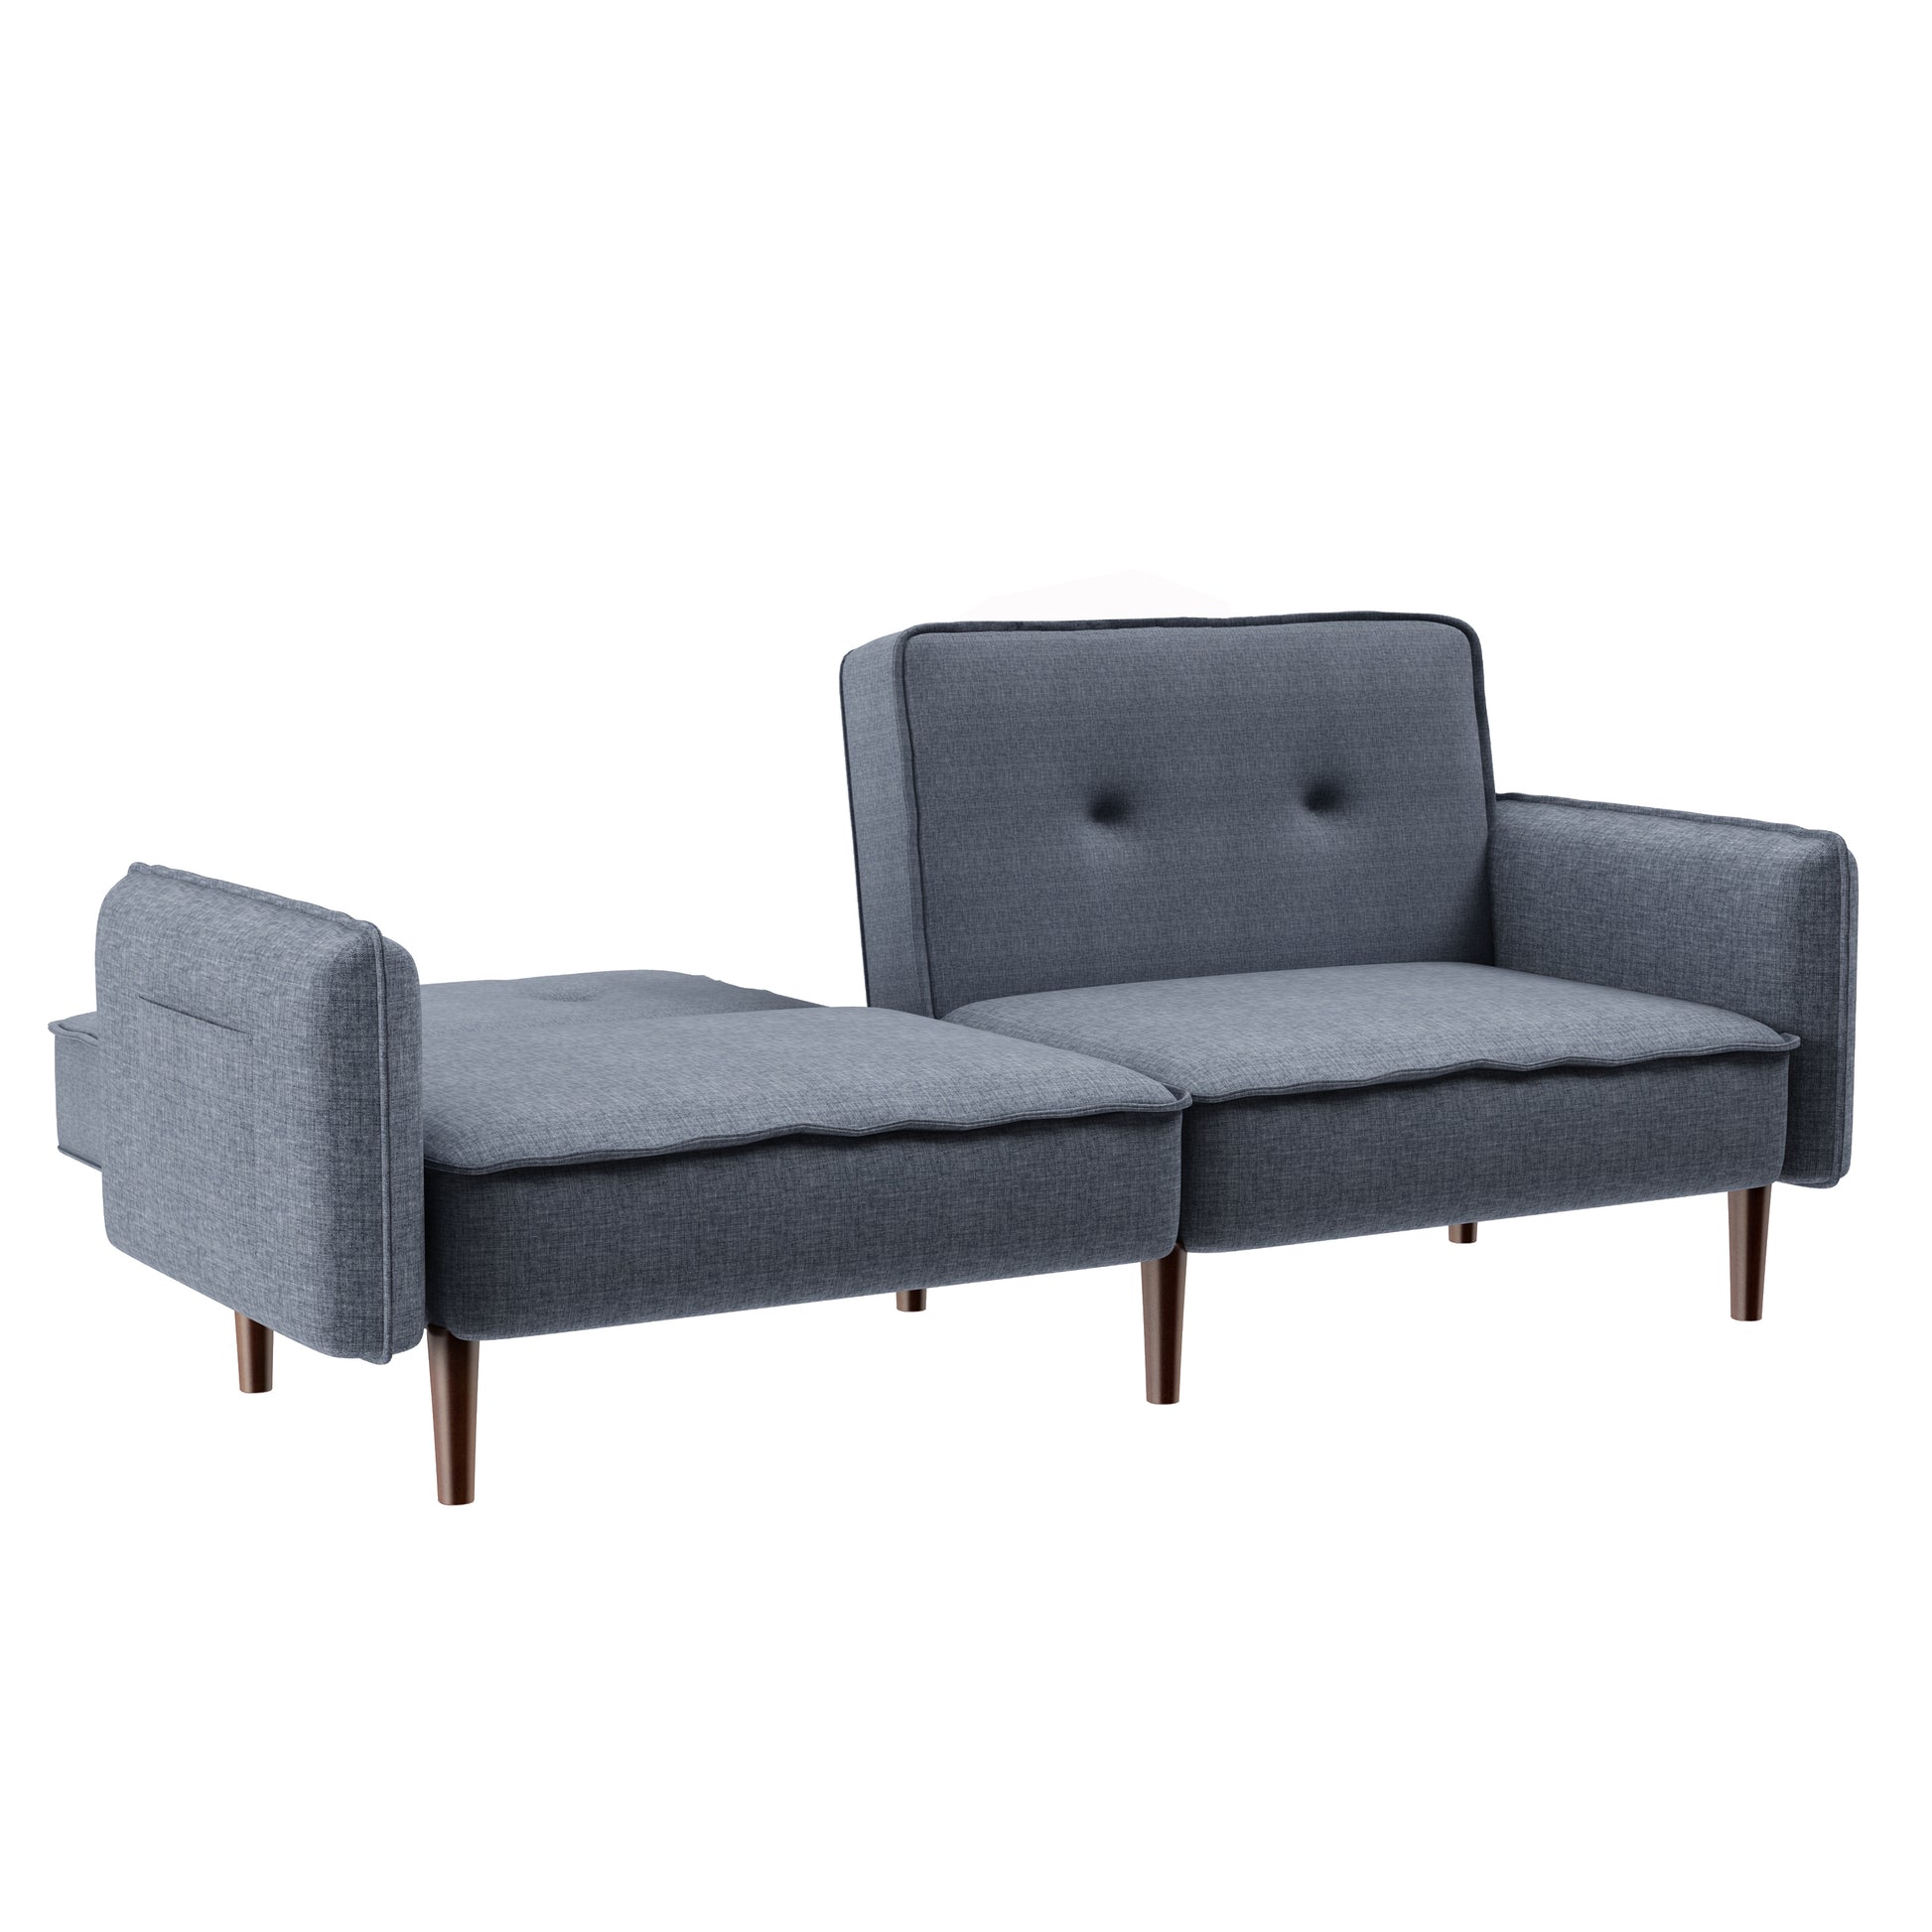 Futon Sofa bed with Solid Wood Leg in Grey Fabric